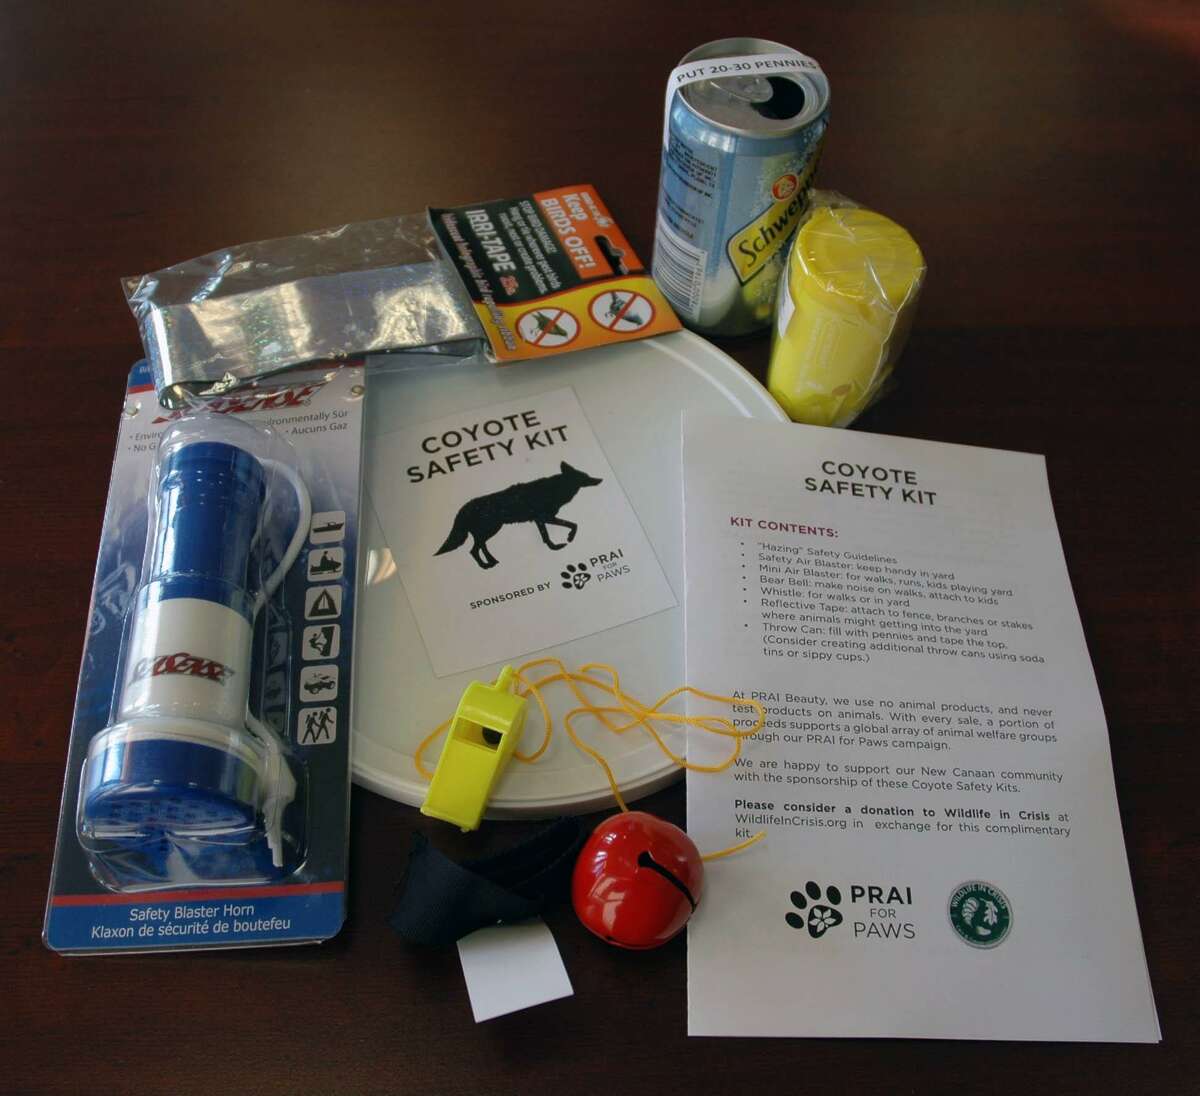 The coyote kit compiled by New Canaan Animal Control includes items like a horn and a whistle to safely scare off the animals.